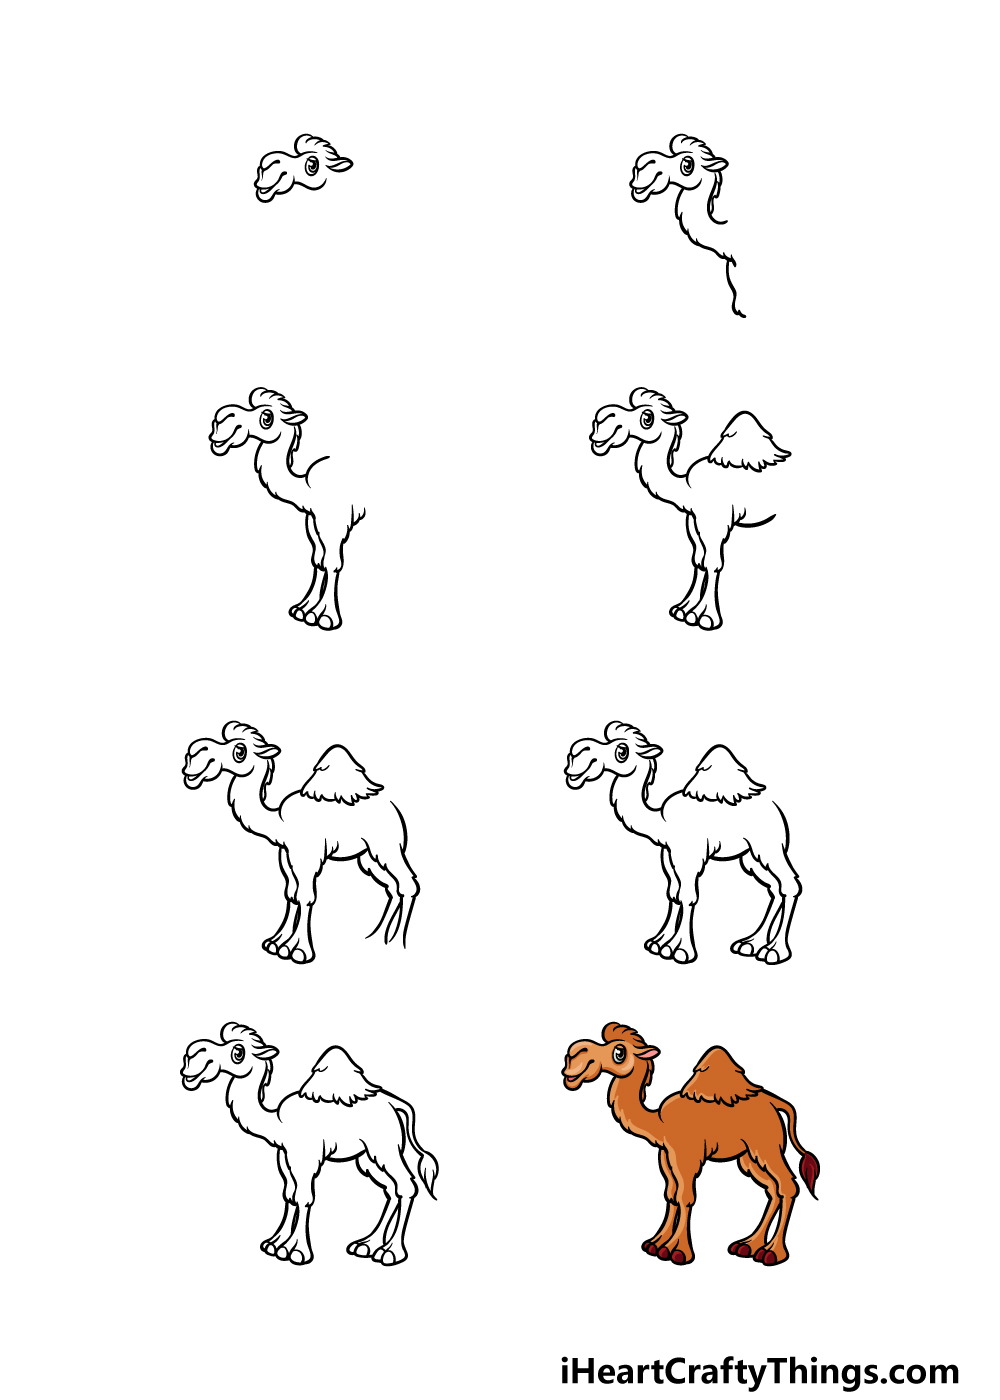 how to draw a cartoon camel in 8 steps